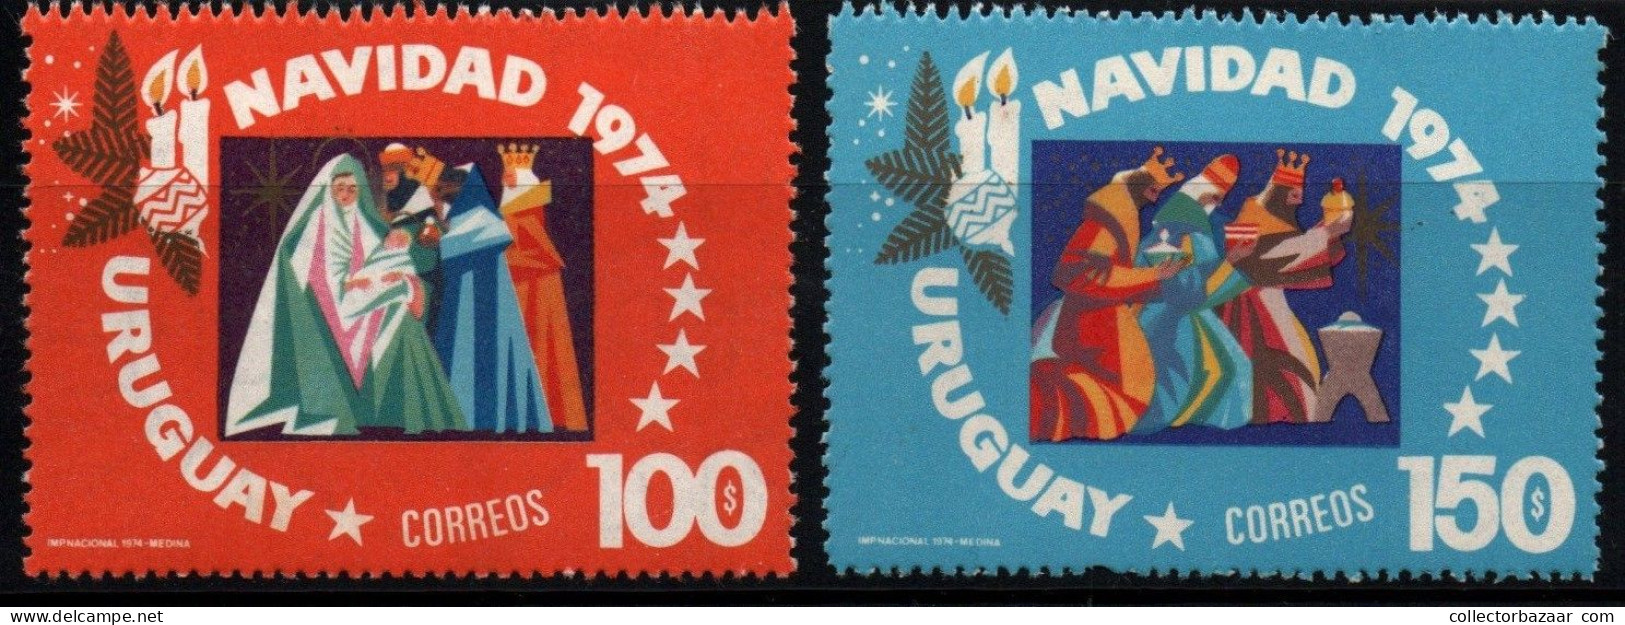 1974 Uruguay Adoration Of The Kings Christmas Religions And Beliefs Celebration #906 - 907 ** MNH - Uruguay